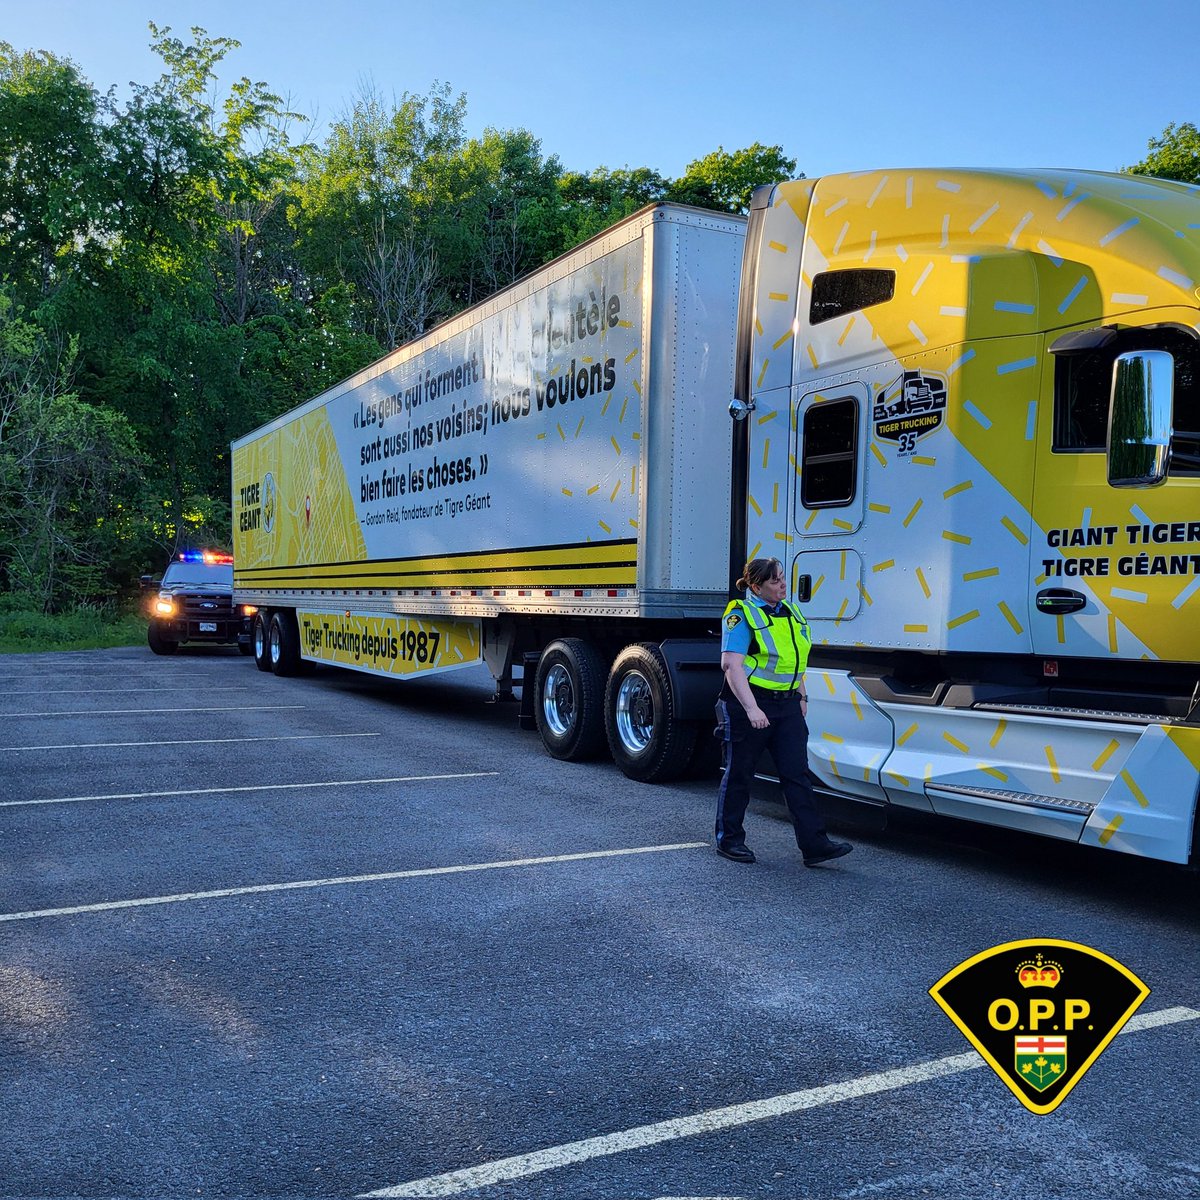 Today, #LeedsOPP and #GrenvilleOPP #Auxiliary members were trained on commercial vehicles. Special thanks to @GTboutique for sharing one of their trucks. Interested in exciting training opportunities and volunteering with the OPP? Apply here: opp.ca/index.php?lng=… ^jpm